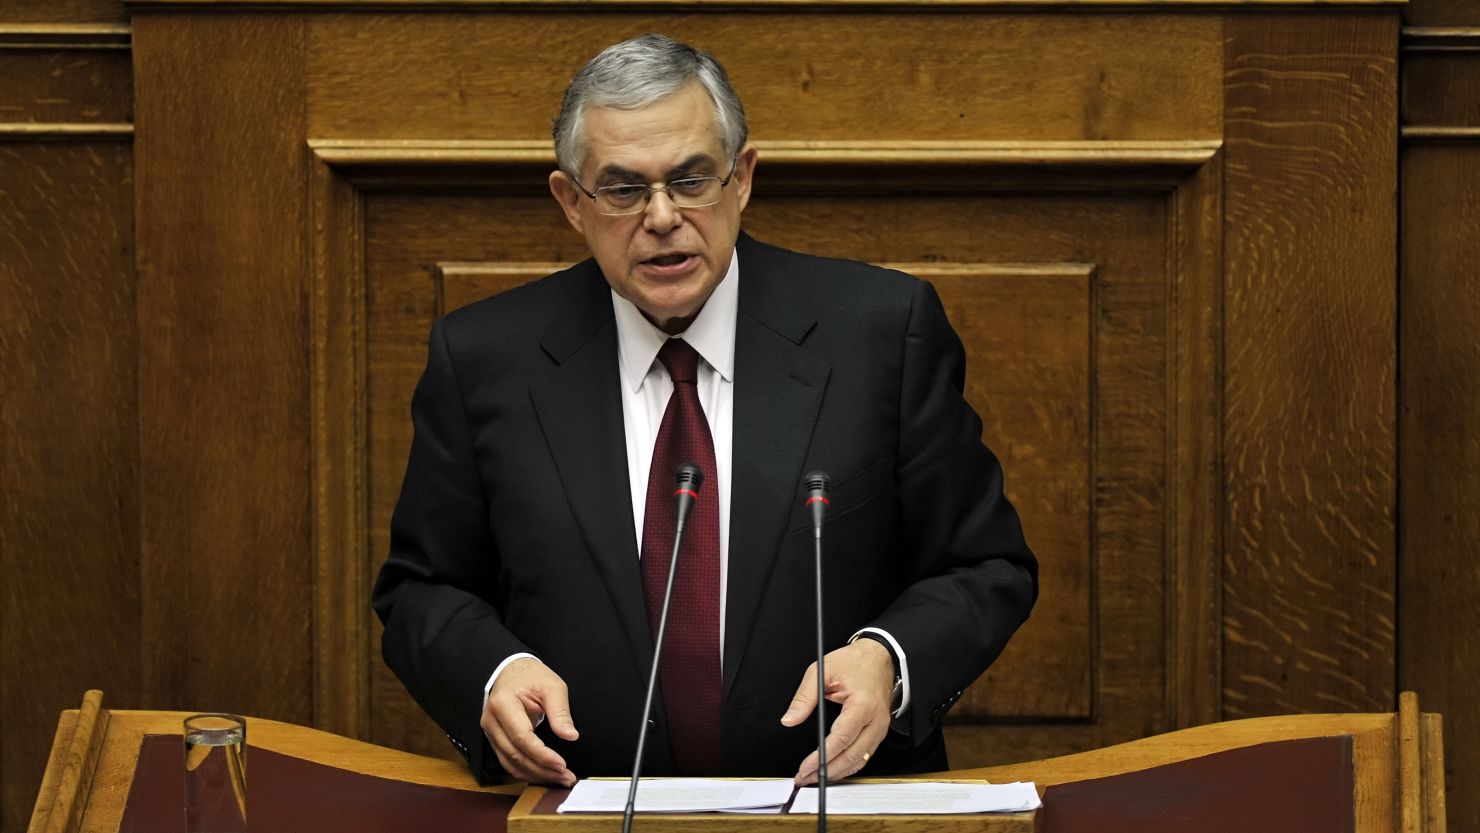 Greek Prime Minister Lucas Papademos speaks to members of the Parliament in his first address to Parliament since taking office.